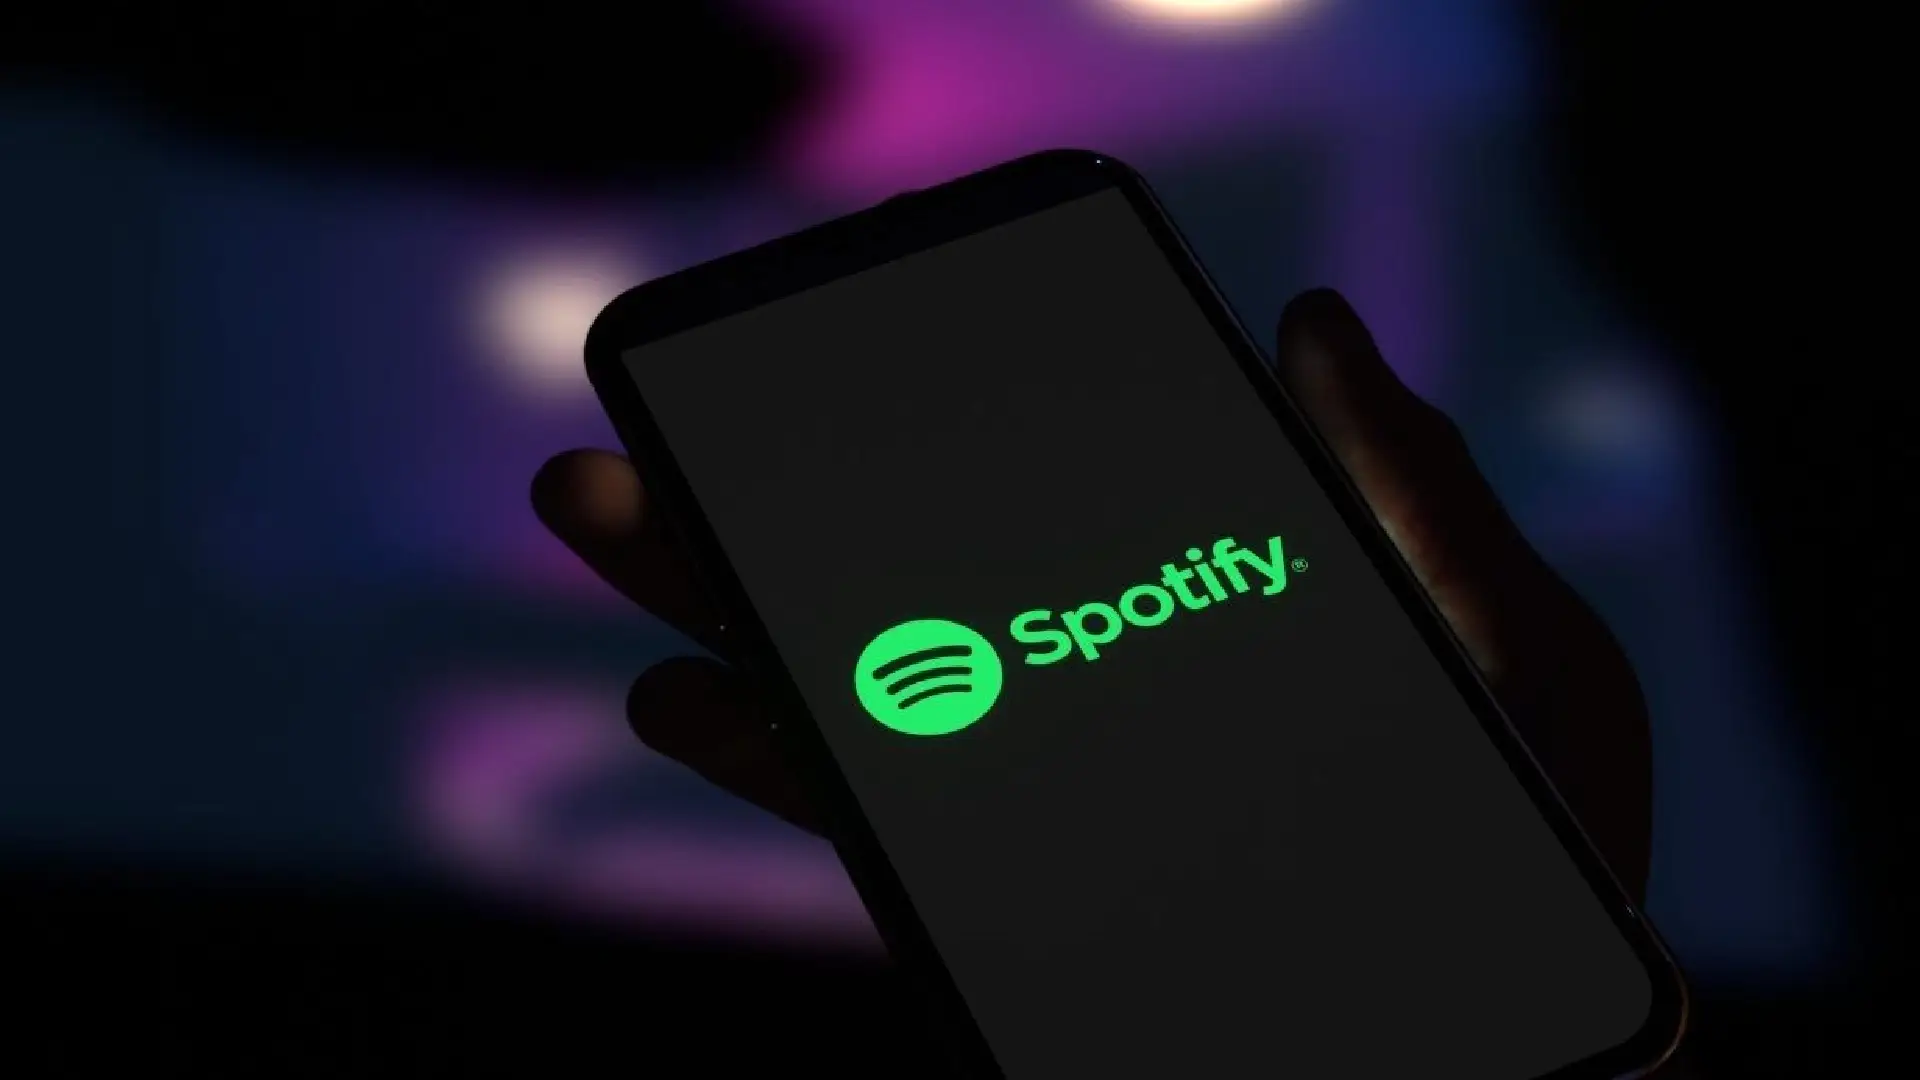 Spotify's New Remix Tool Lets You Change Songs Like a DJ: A Fresh Way to Enjoy and Support Your Favorite Artists